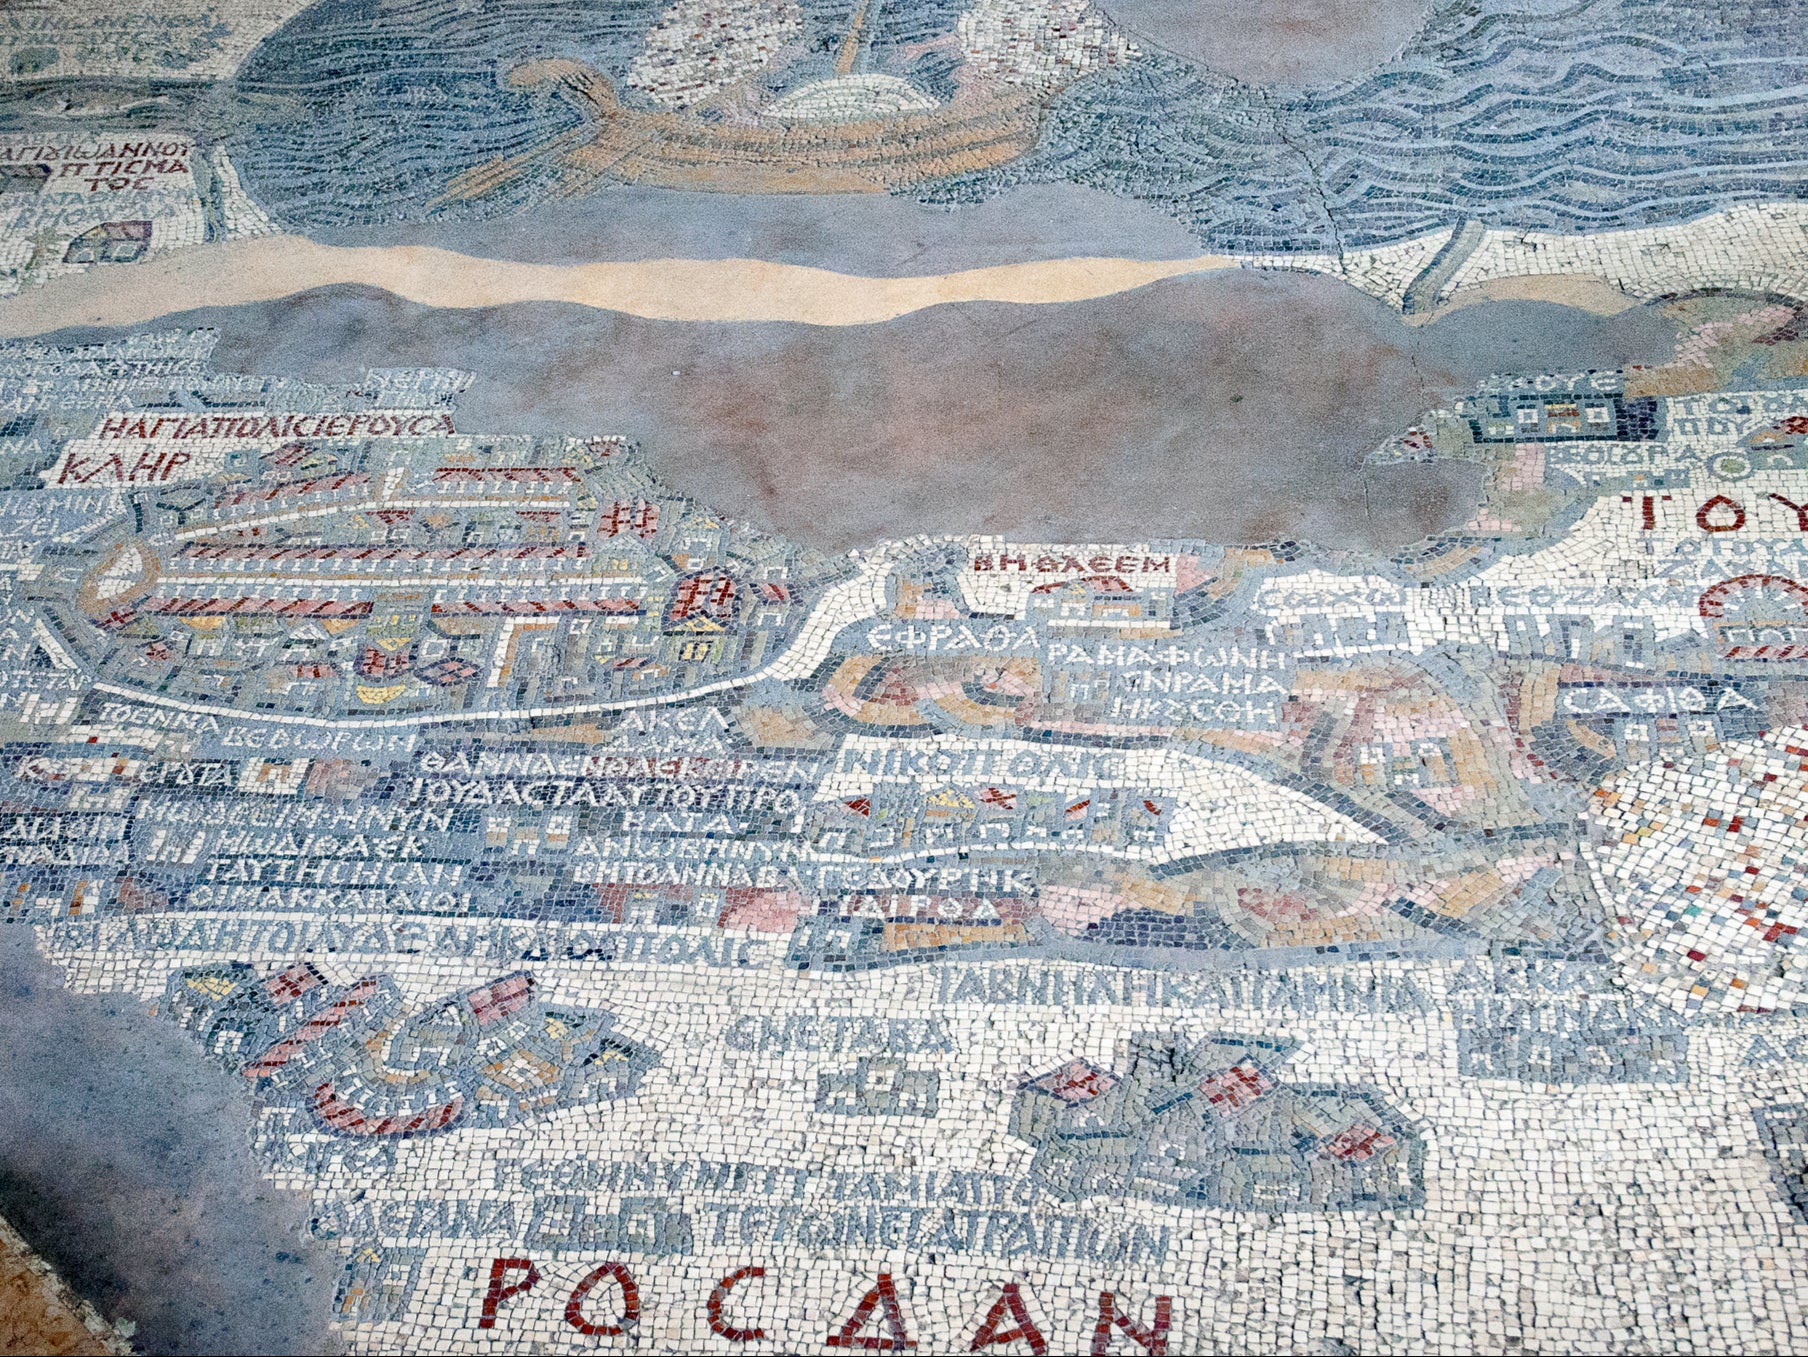 These beautiful mosaics make up the oldest known map showing the Holy Land